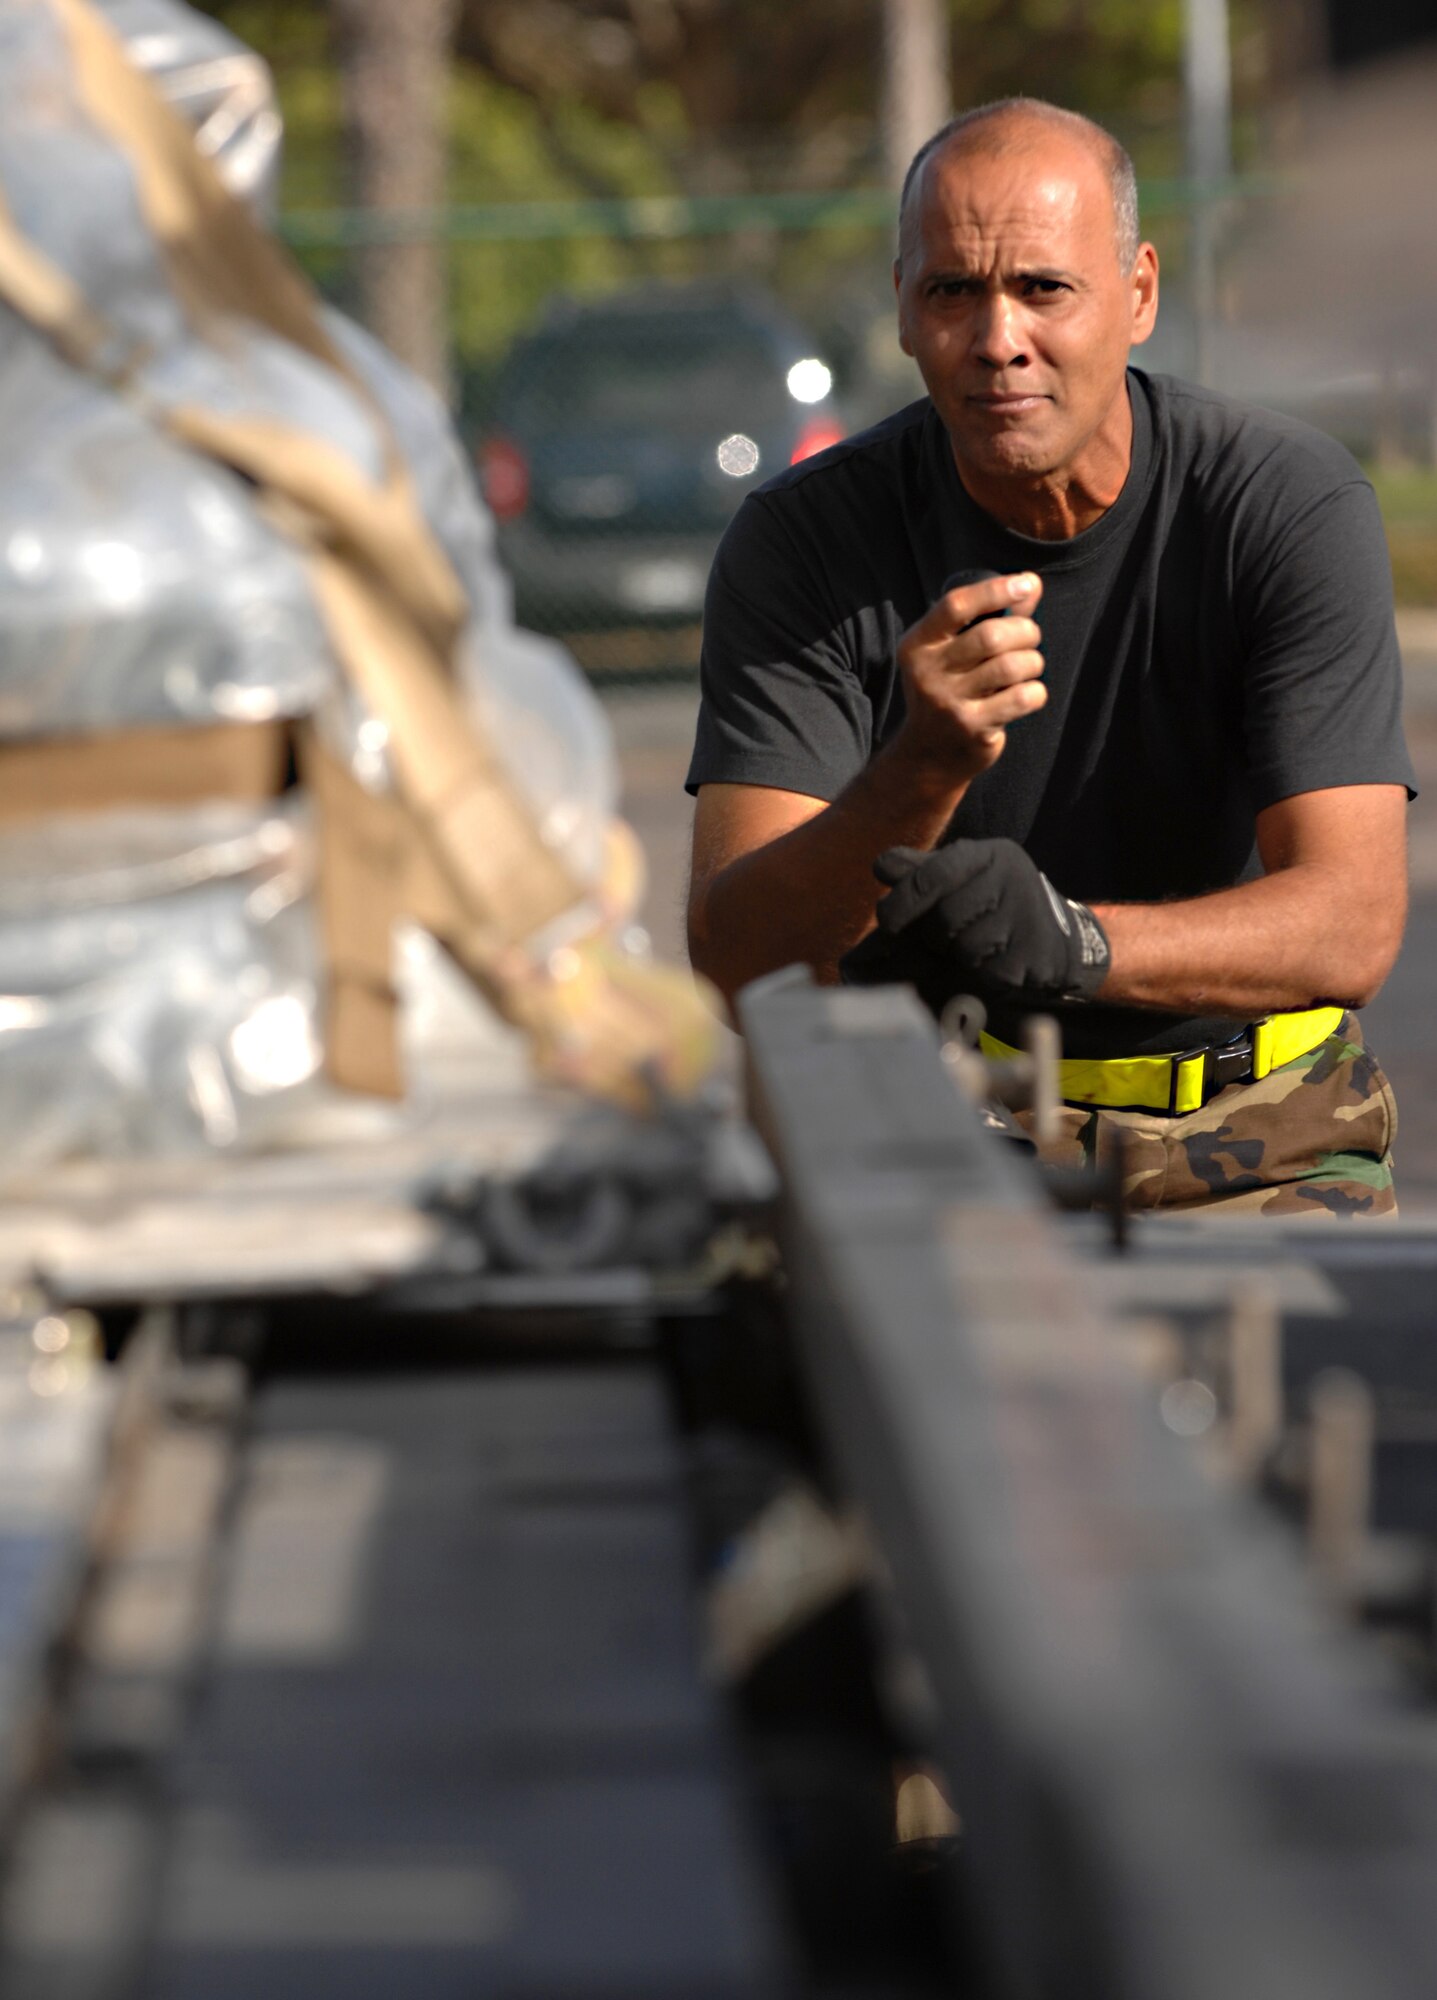 U.S. Air Force Tech. Sgt. Jay J. Perez, an aerial port specialist with the 44th Aerial Port Squadron, Andersen Air Force Base, Guam, loads a pallet container of meals, ready to eat packages during Pacific Lifeline on Hickam Air Force Base, Hawaii, Jan. 29, 2008. Pacific Lifeline trains personnel to deploy in response to a humanitarian assistance or disaster scenario. (U.S. Air Force photo by Airman 1st Class Jimmy L. Dang)